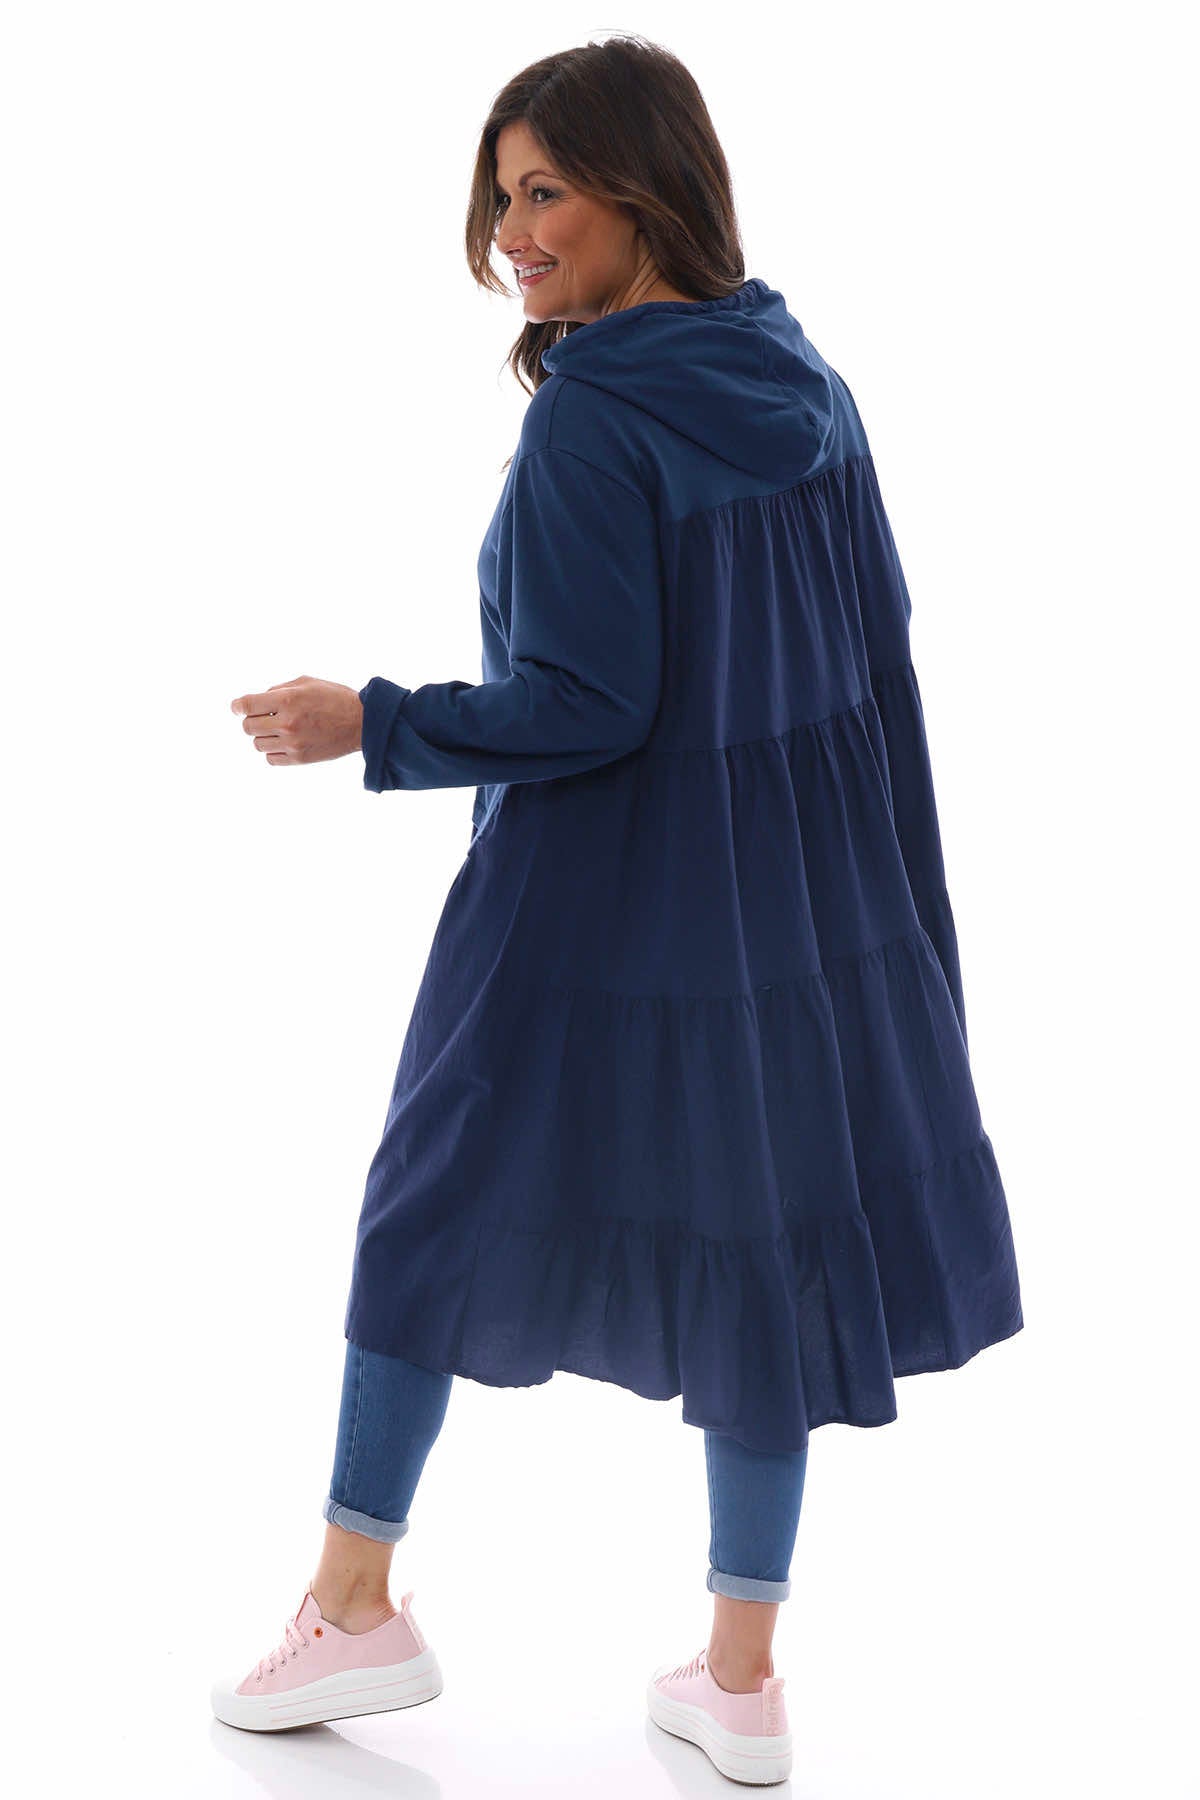 Lily Hooded Cotton Tunic Navy